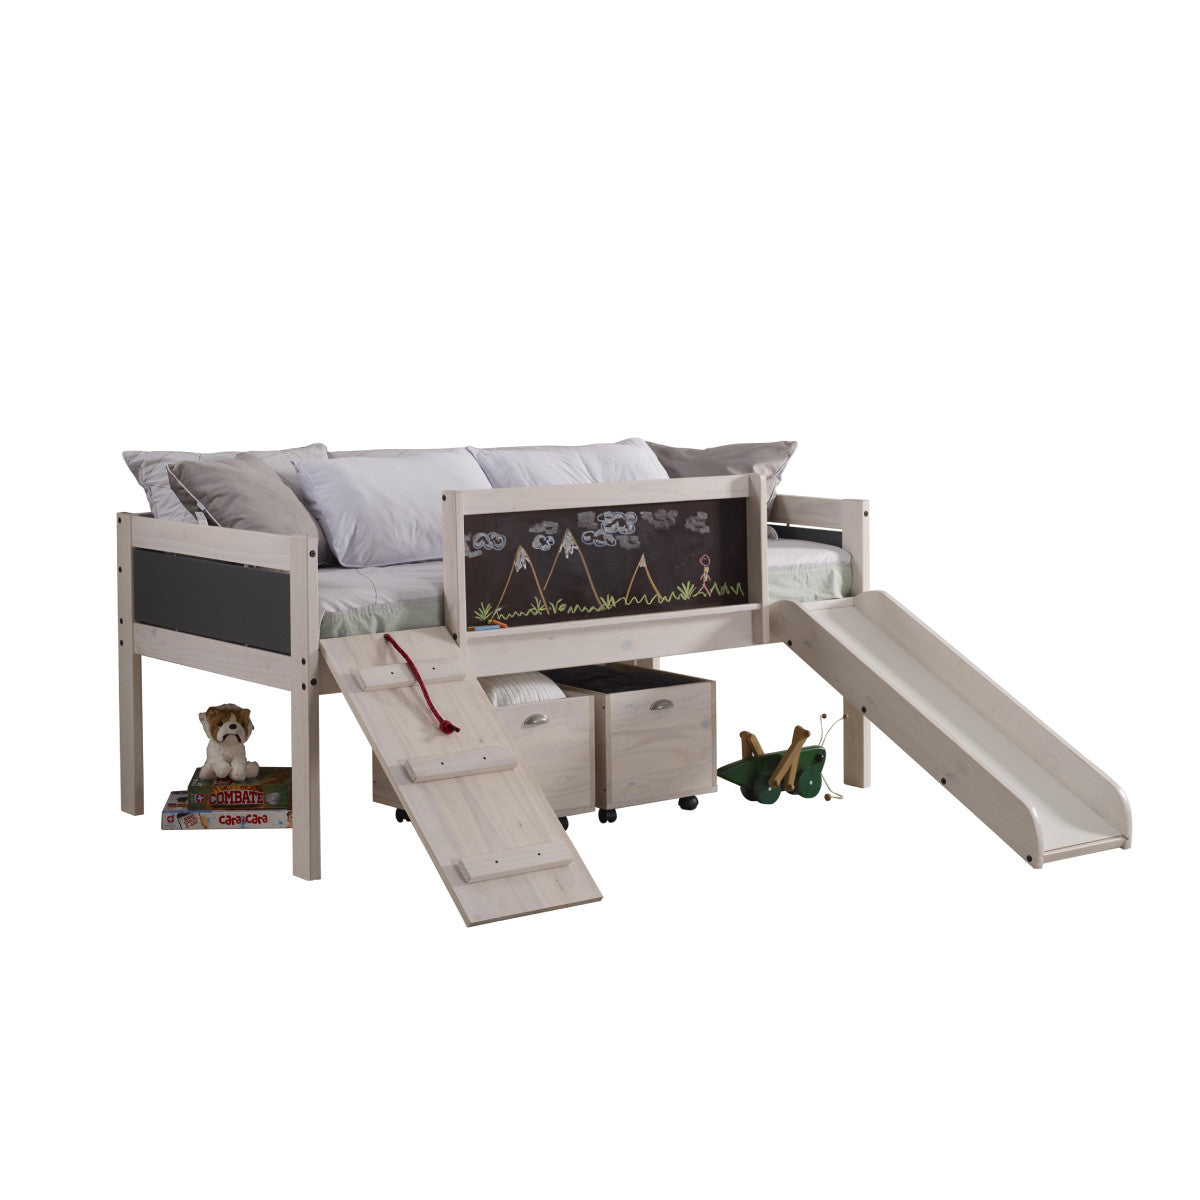 TWIN ART PLAY JUNIOR LOW LOFT WITH TOY BOXES IN WHITE WASH/DARK GREY FINISH